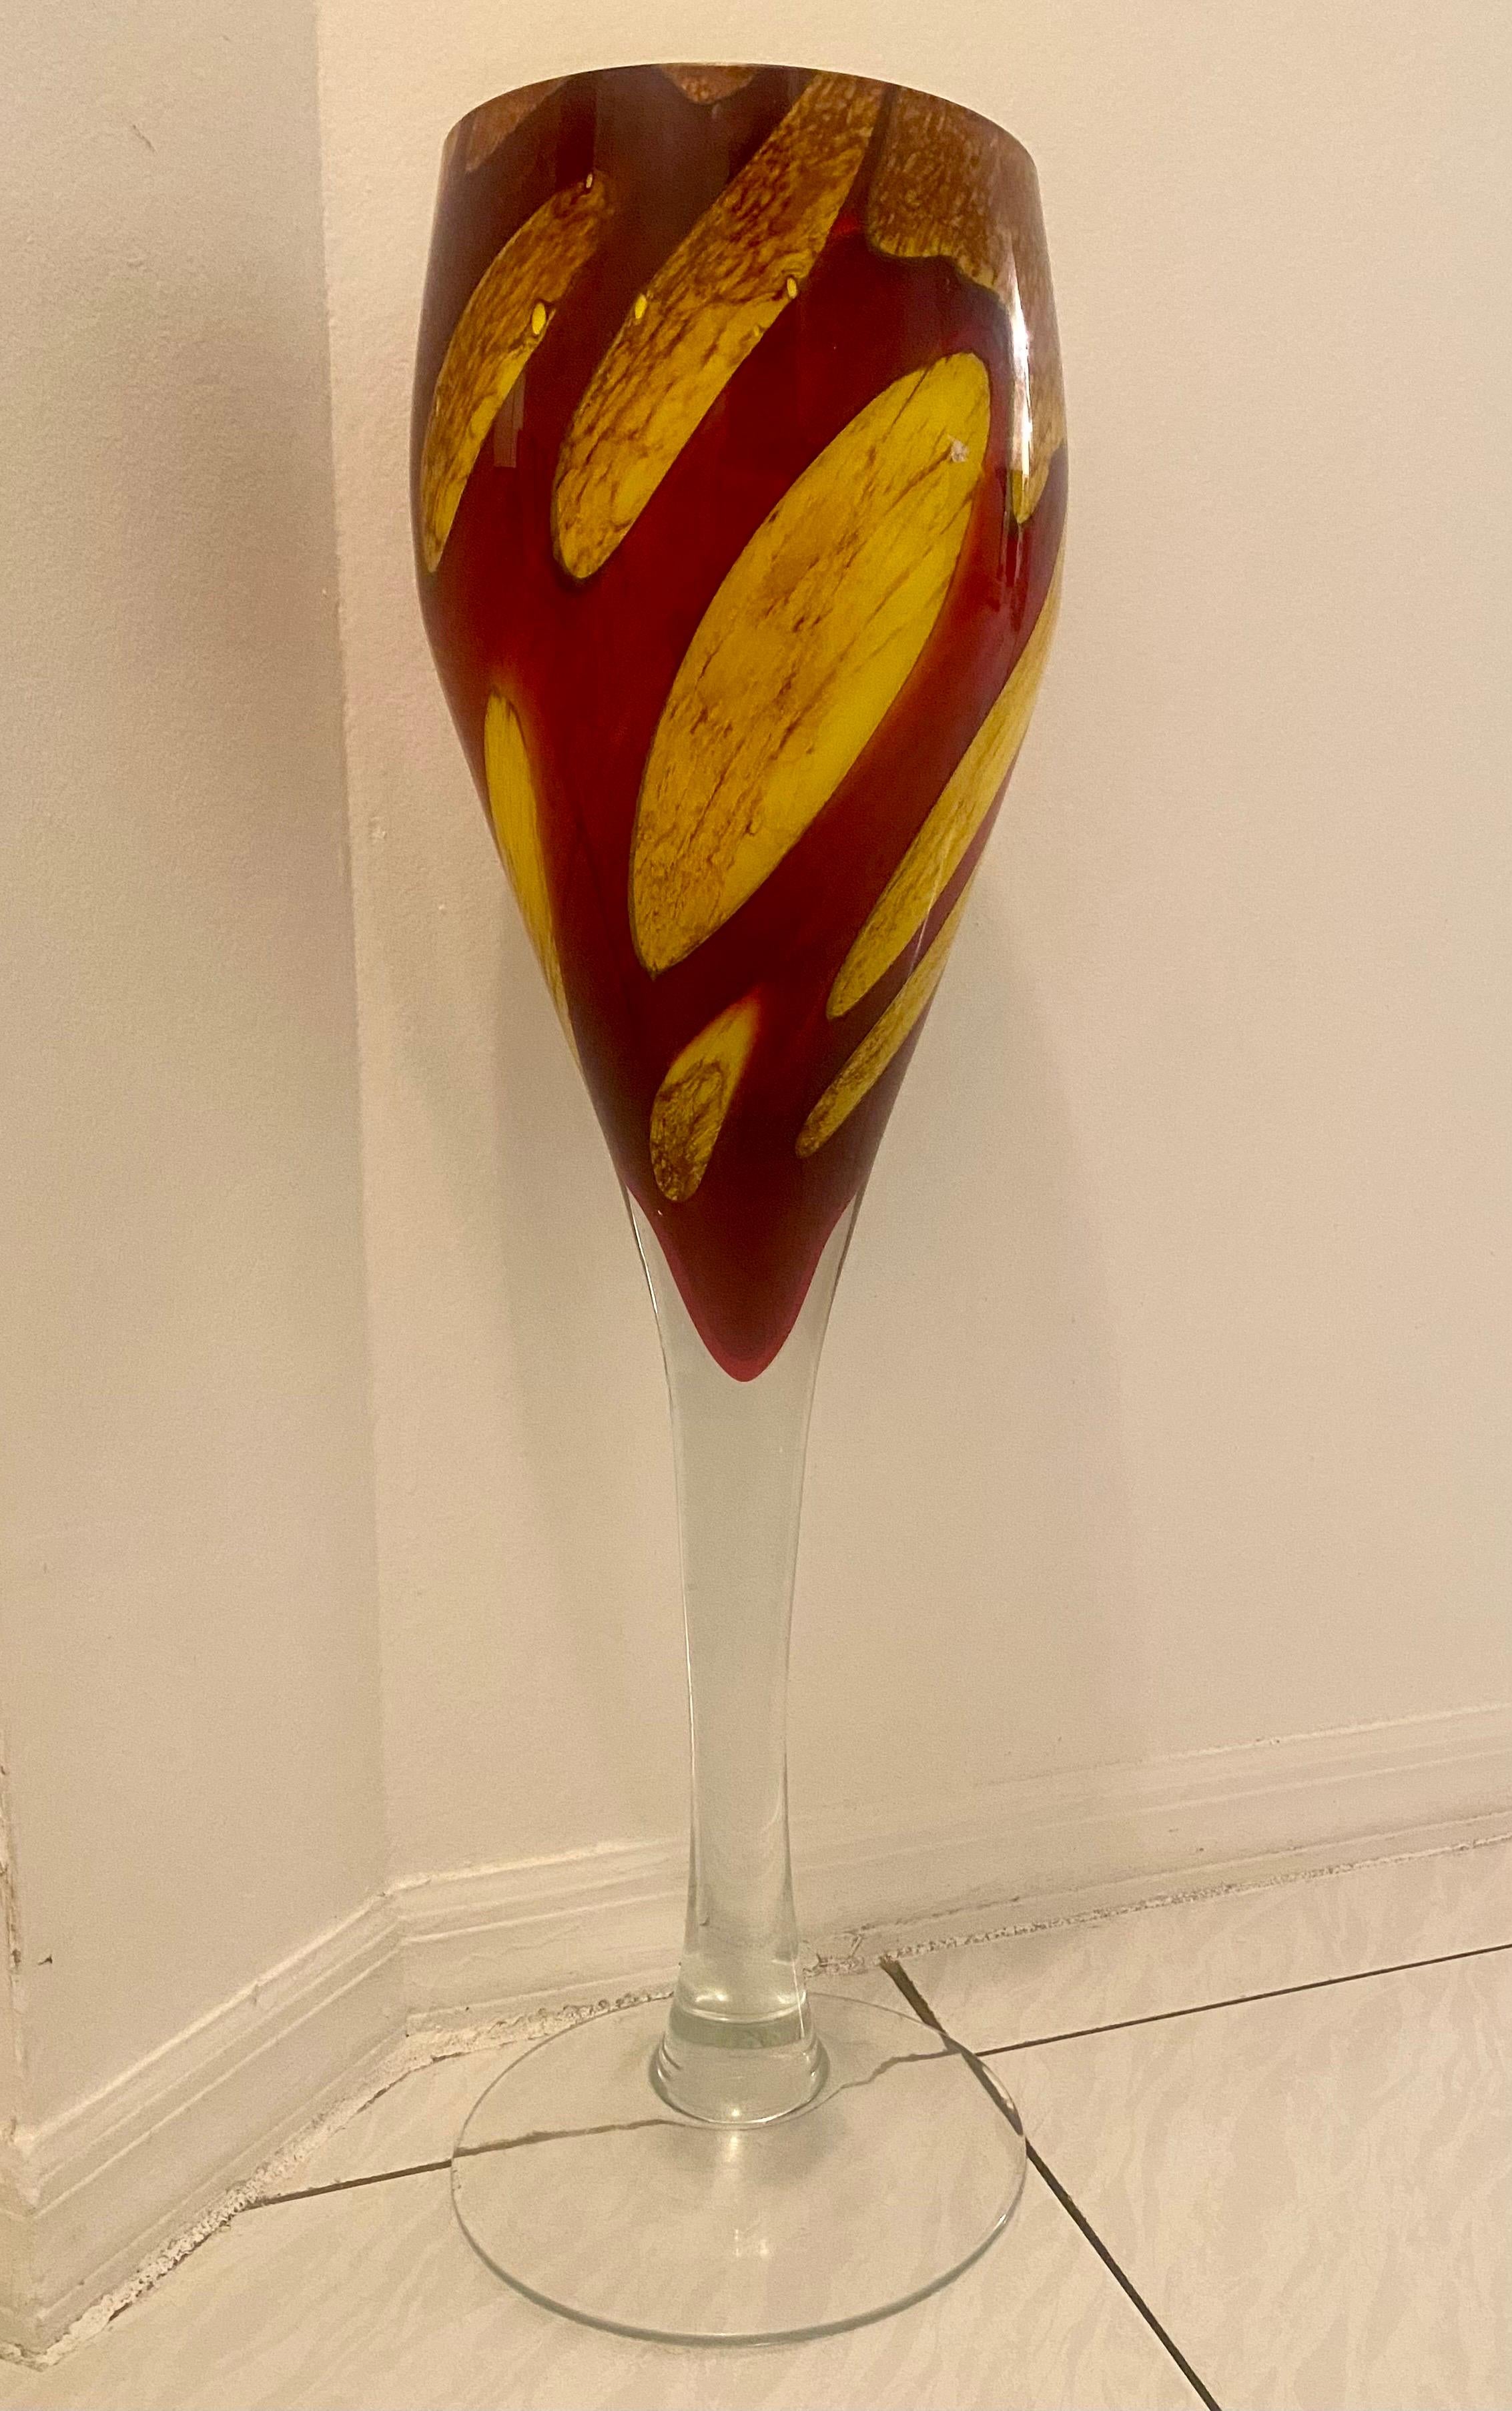 Tall Murano glass vase in the shape of a wine goblet with a yellow interior. Unsigned, circa 1970s.